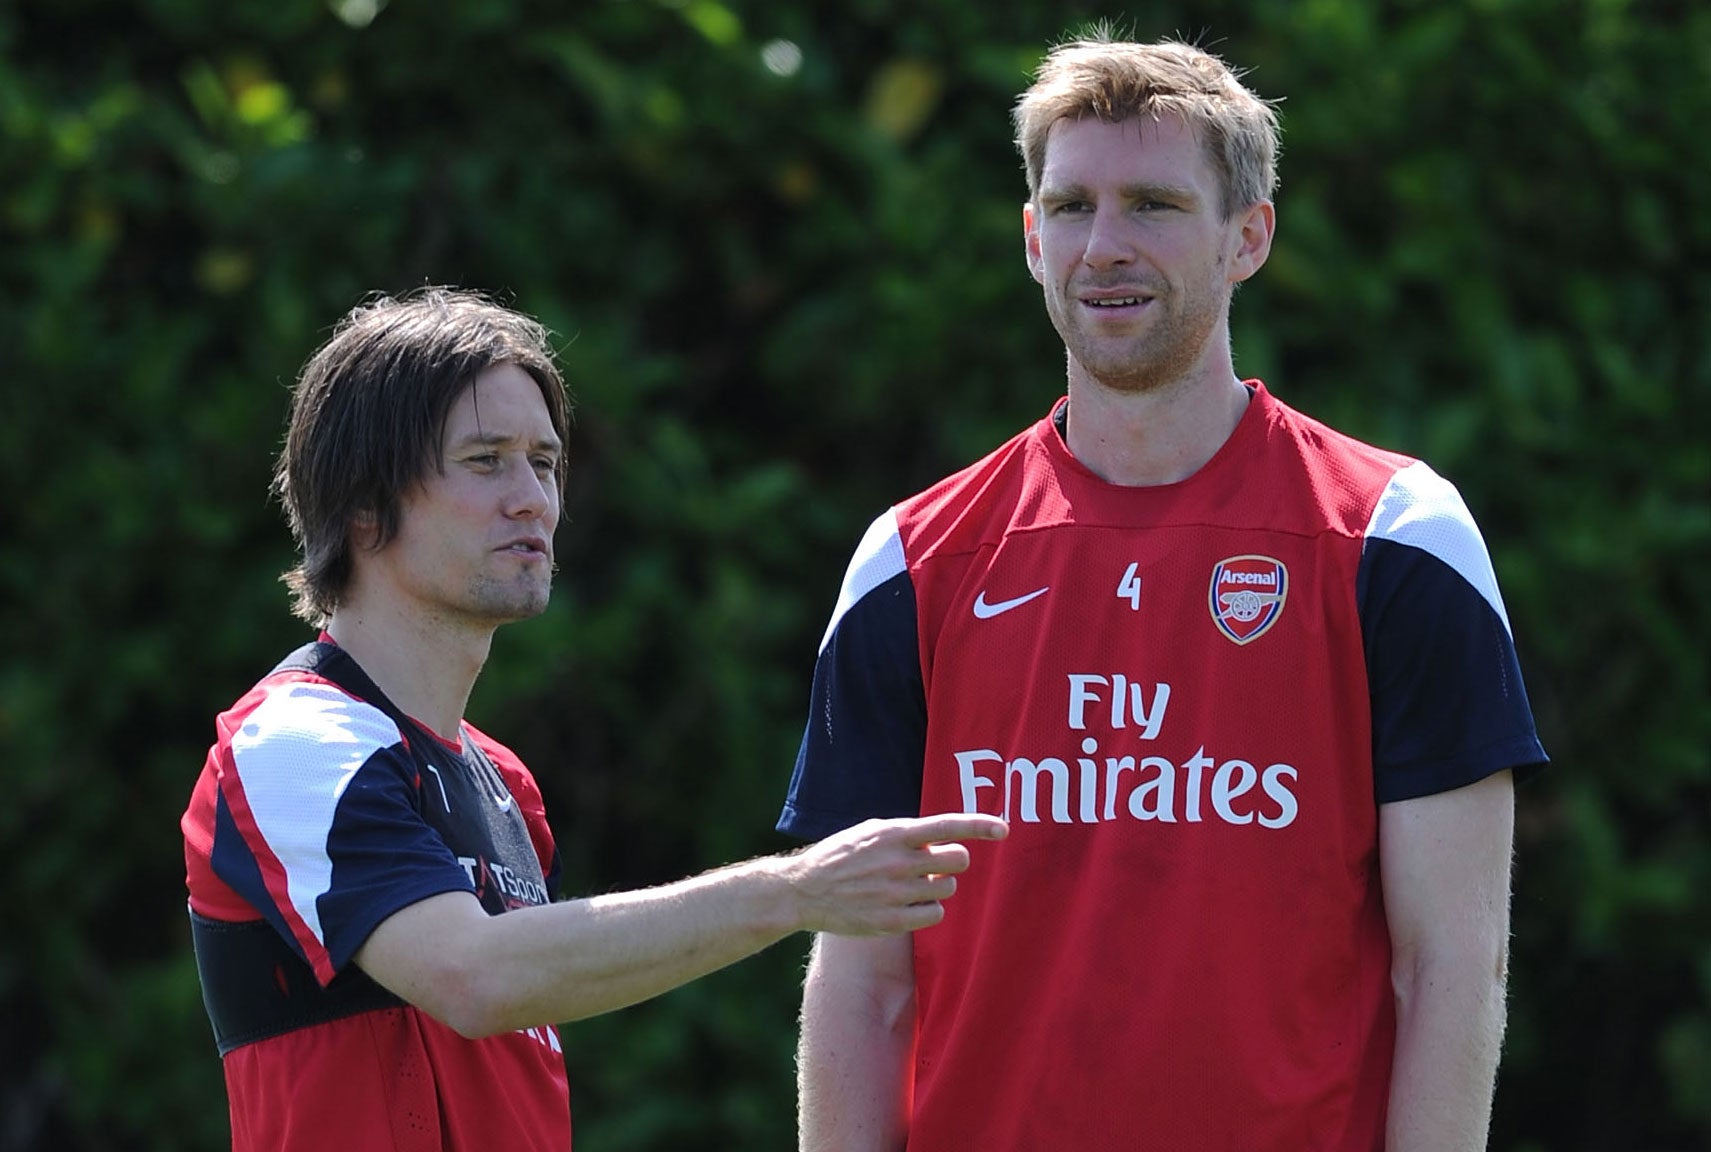 Tomas Rosicky (left) and Per Mertesacker will not feature for Arsenal against Manchester United because of illness